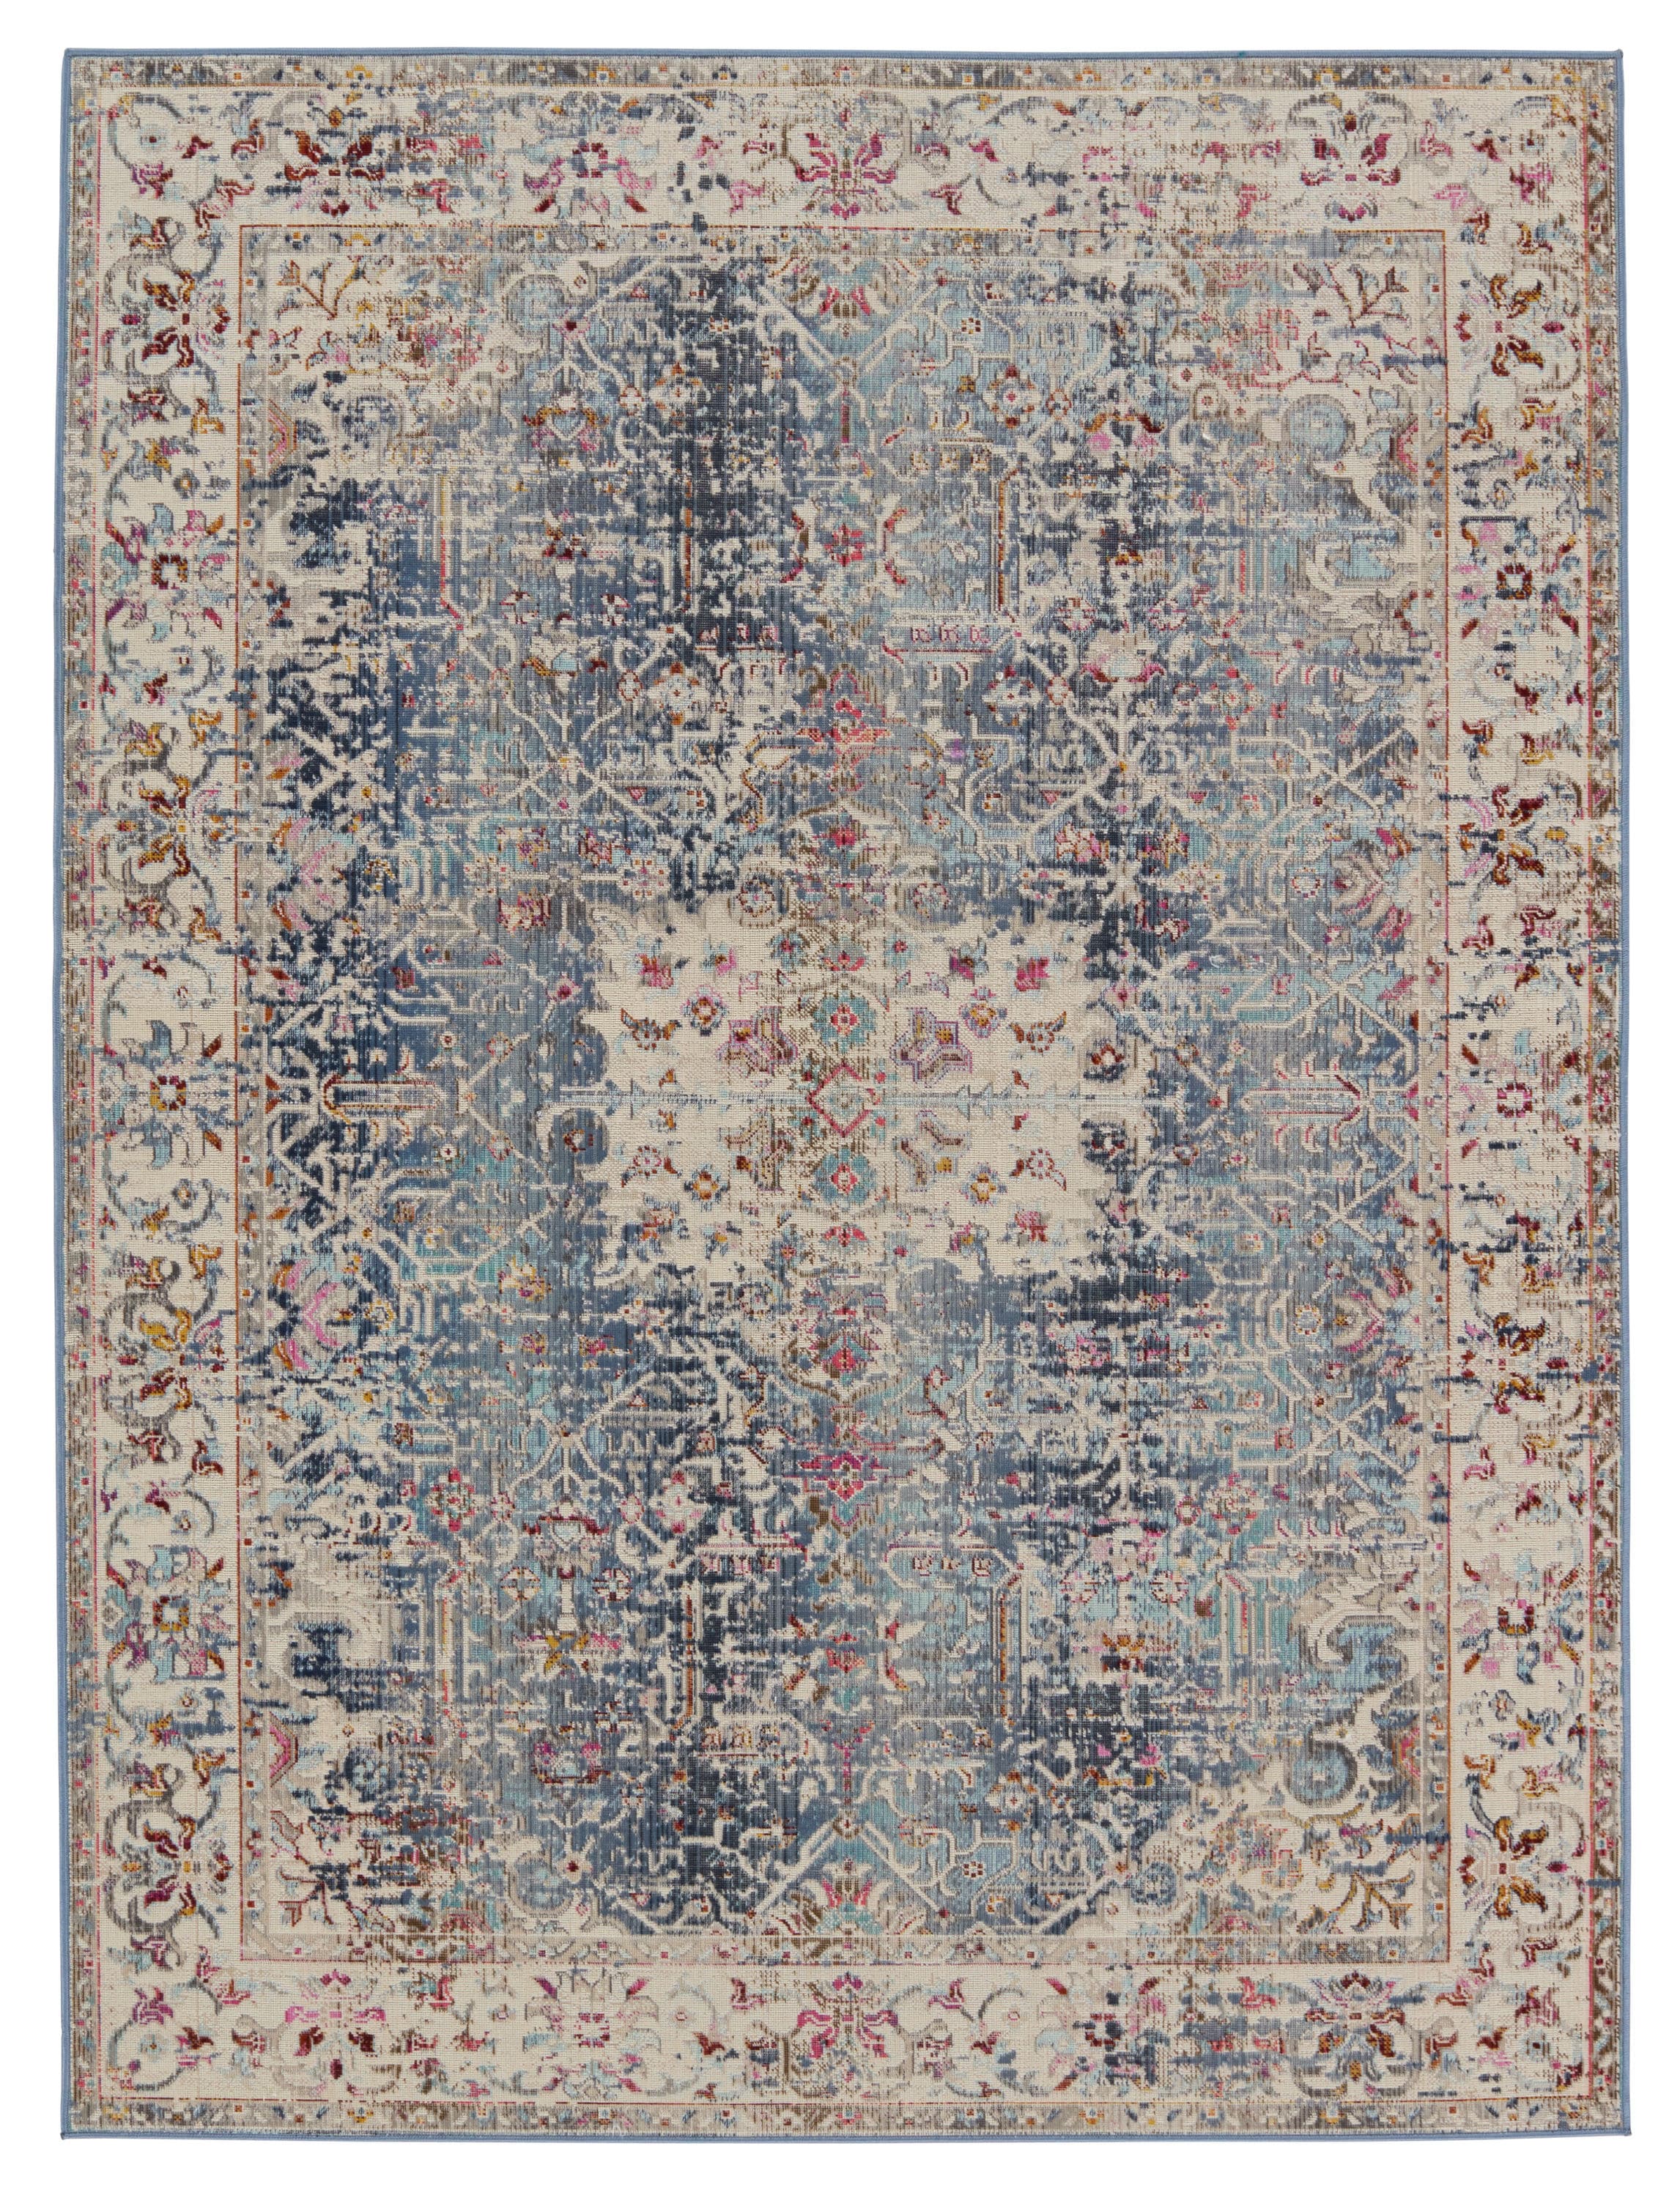 How to Choose the Best Area Rugs, Lowe's